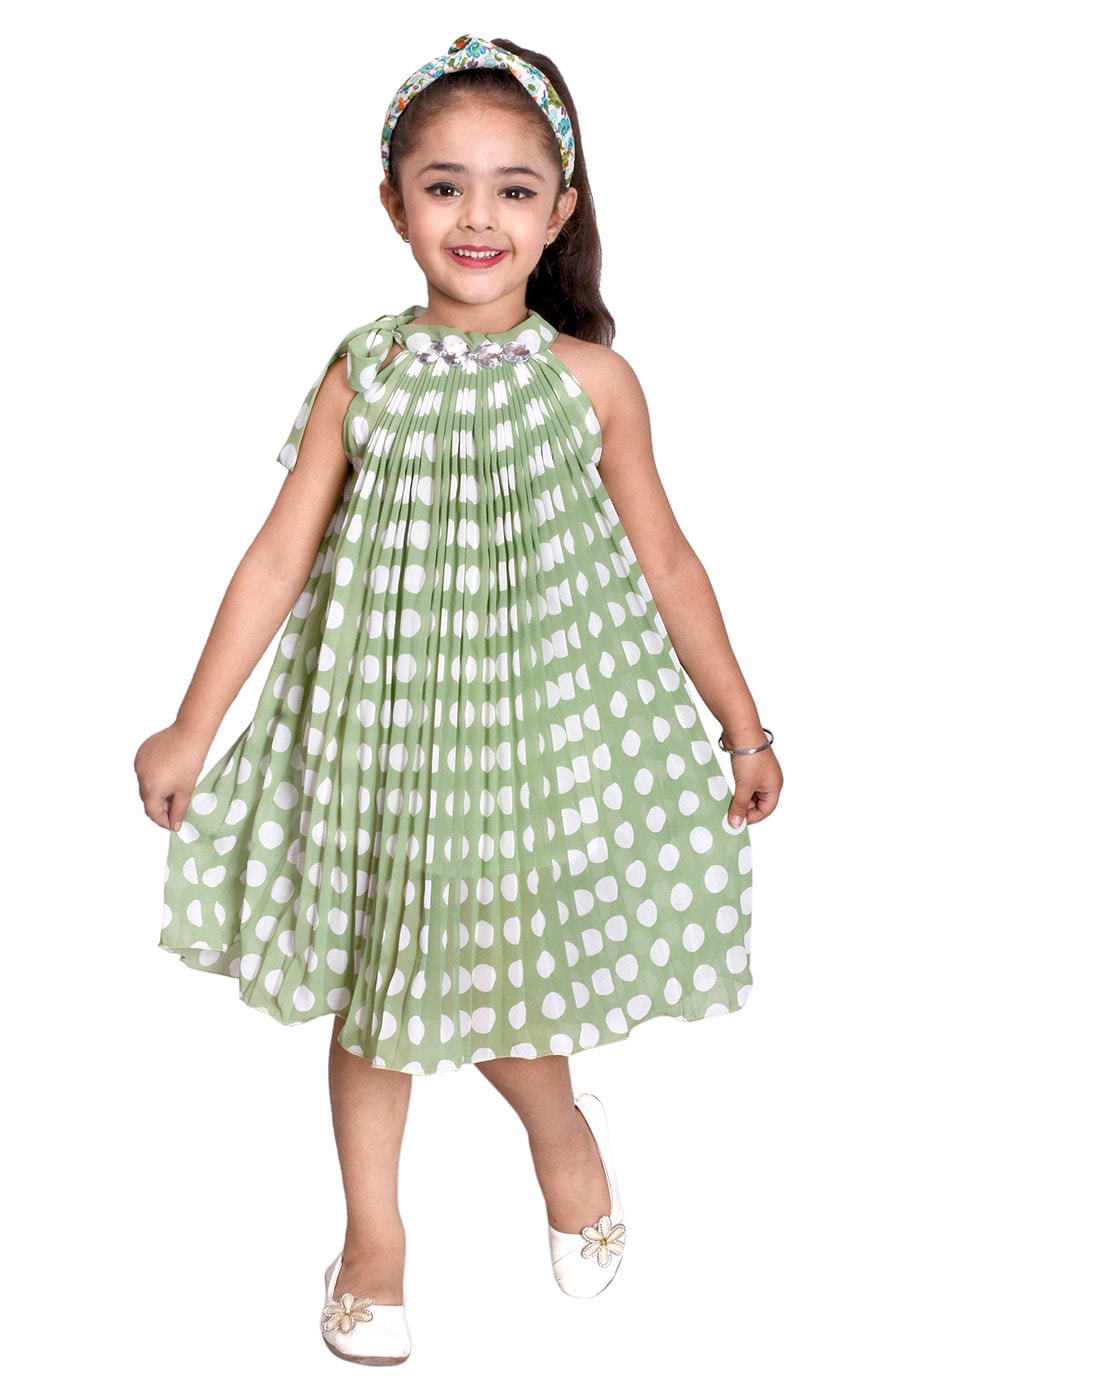 Modish Kids Dress Girls Golden Color Party Dress Sleeveless Long Gown :  Amazon.in: Clothing & Accessories